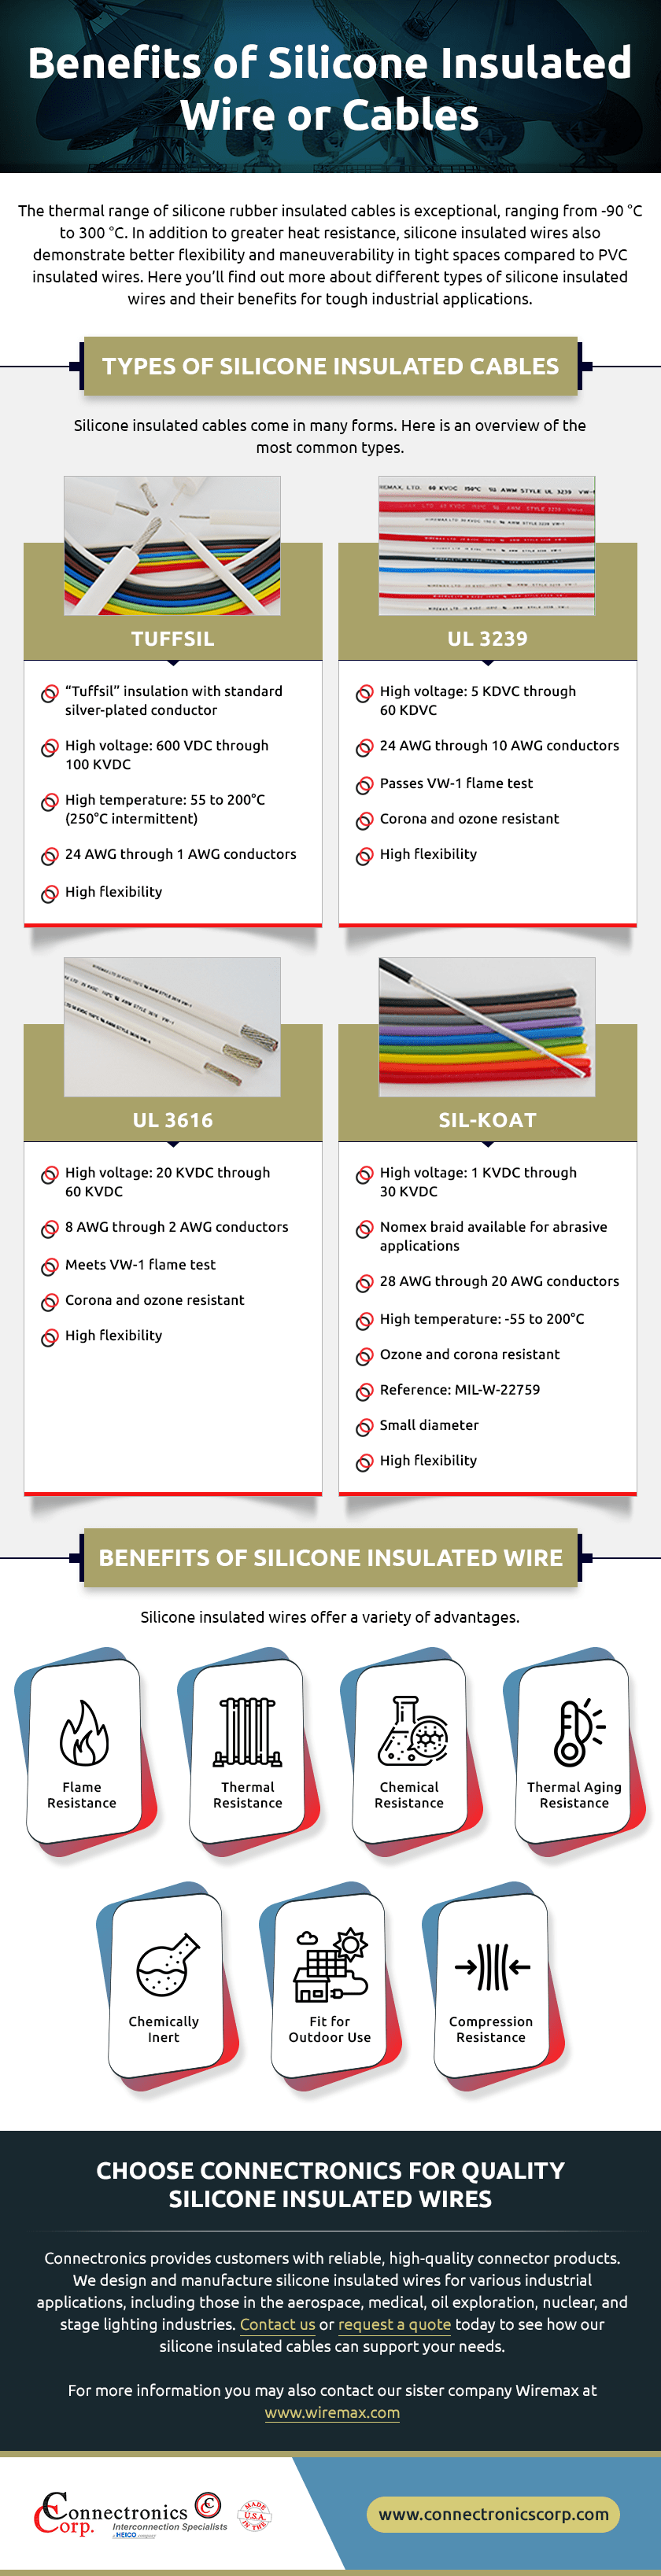 Benefits-of-Silicone-Insulated-Wire-or-Cables